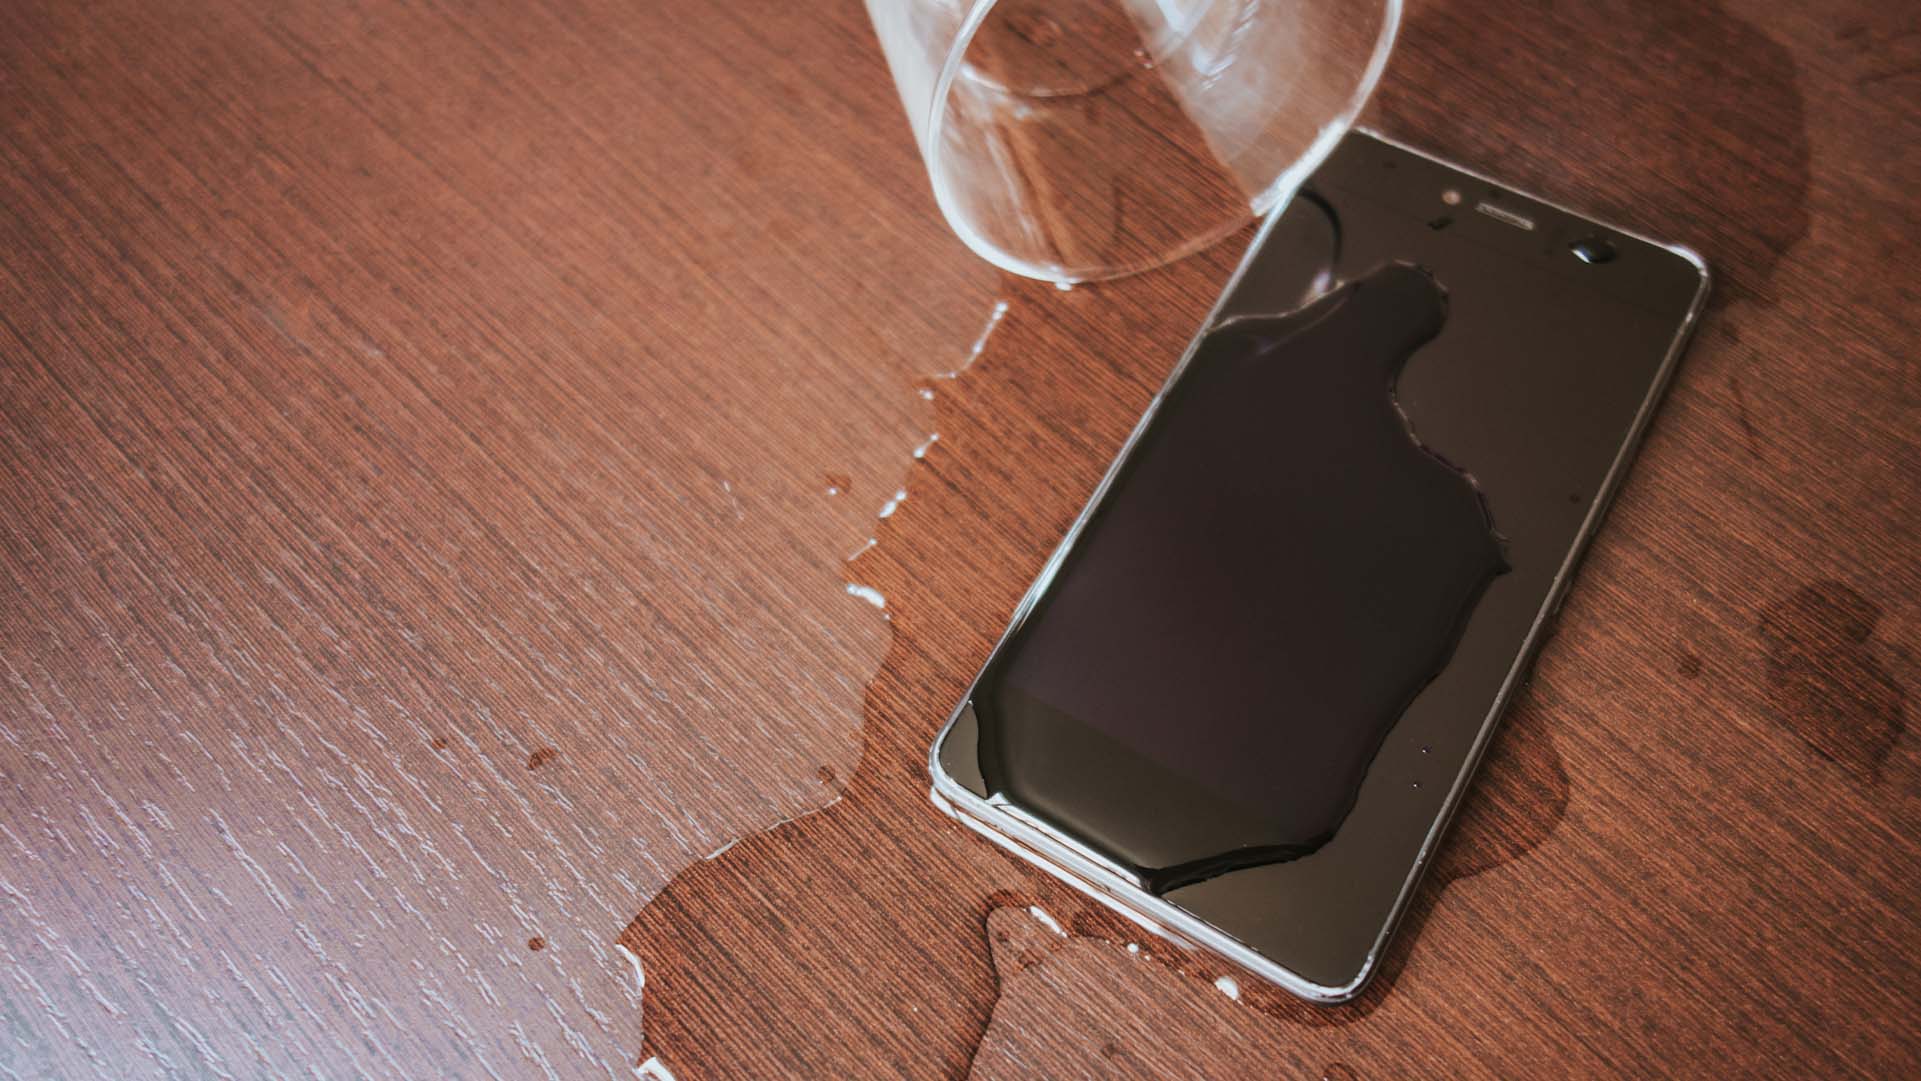 A smartphone lies on a wooden surface with spilled liquid spreading from an overturned glass.